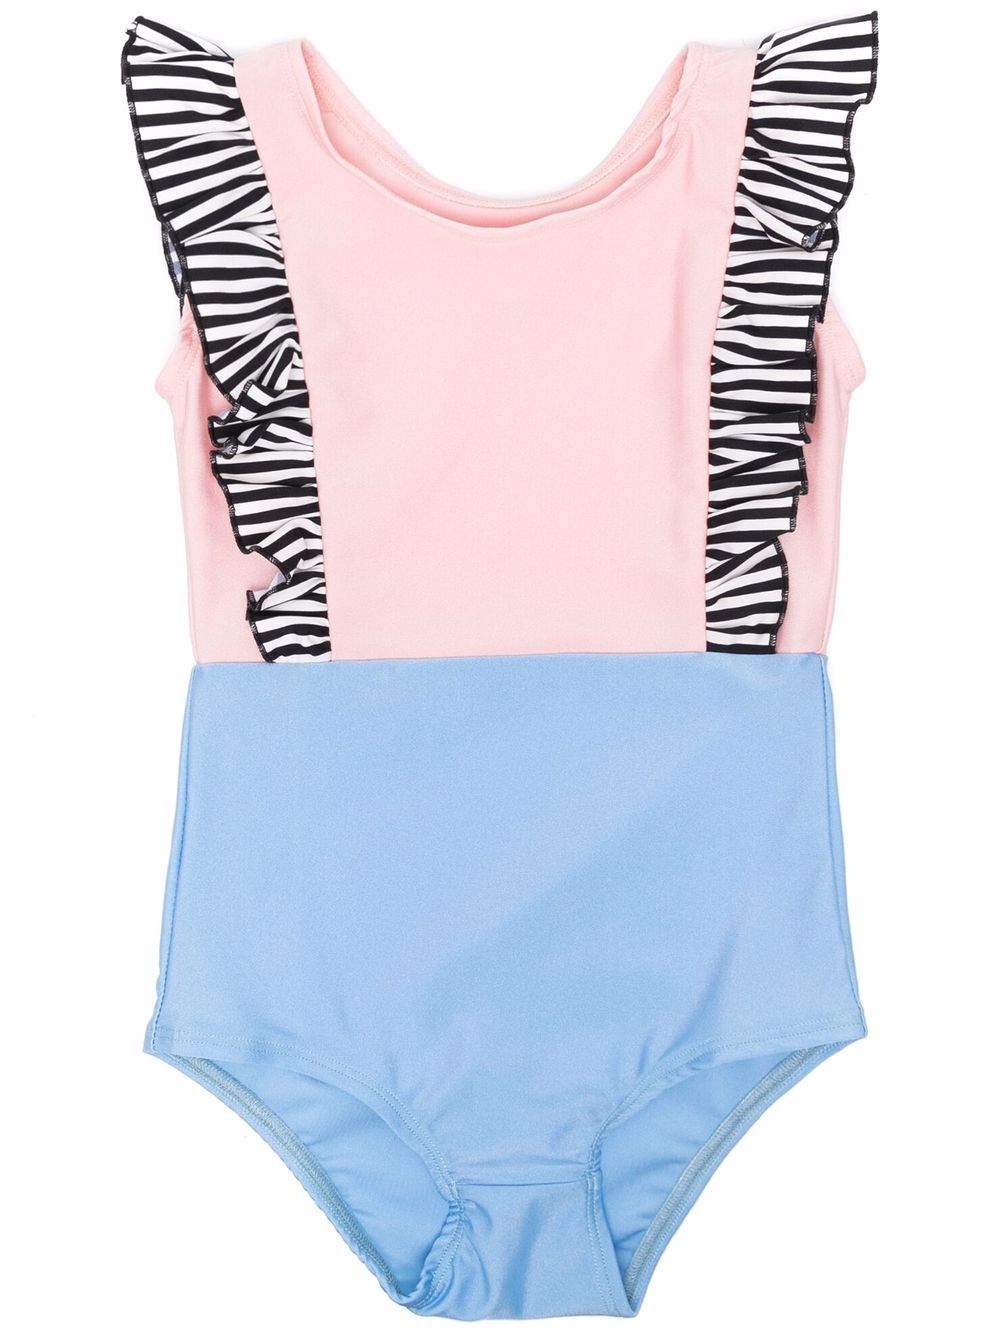 WAUW CAPOW by BANGBANG Harper summer swimsuits - Pink von WAUW CAPOW by BANGBANG